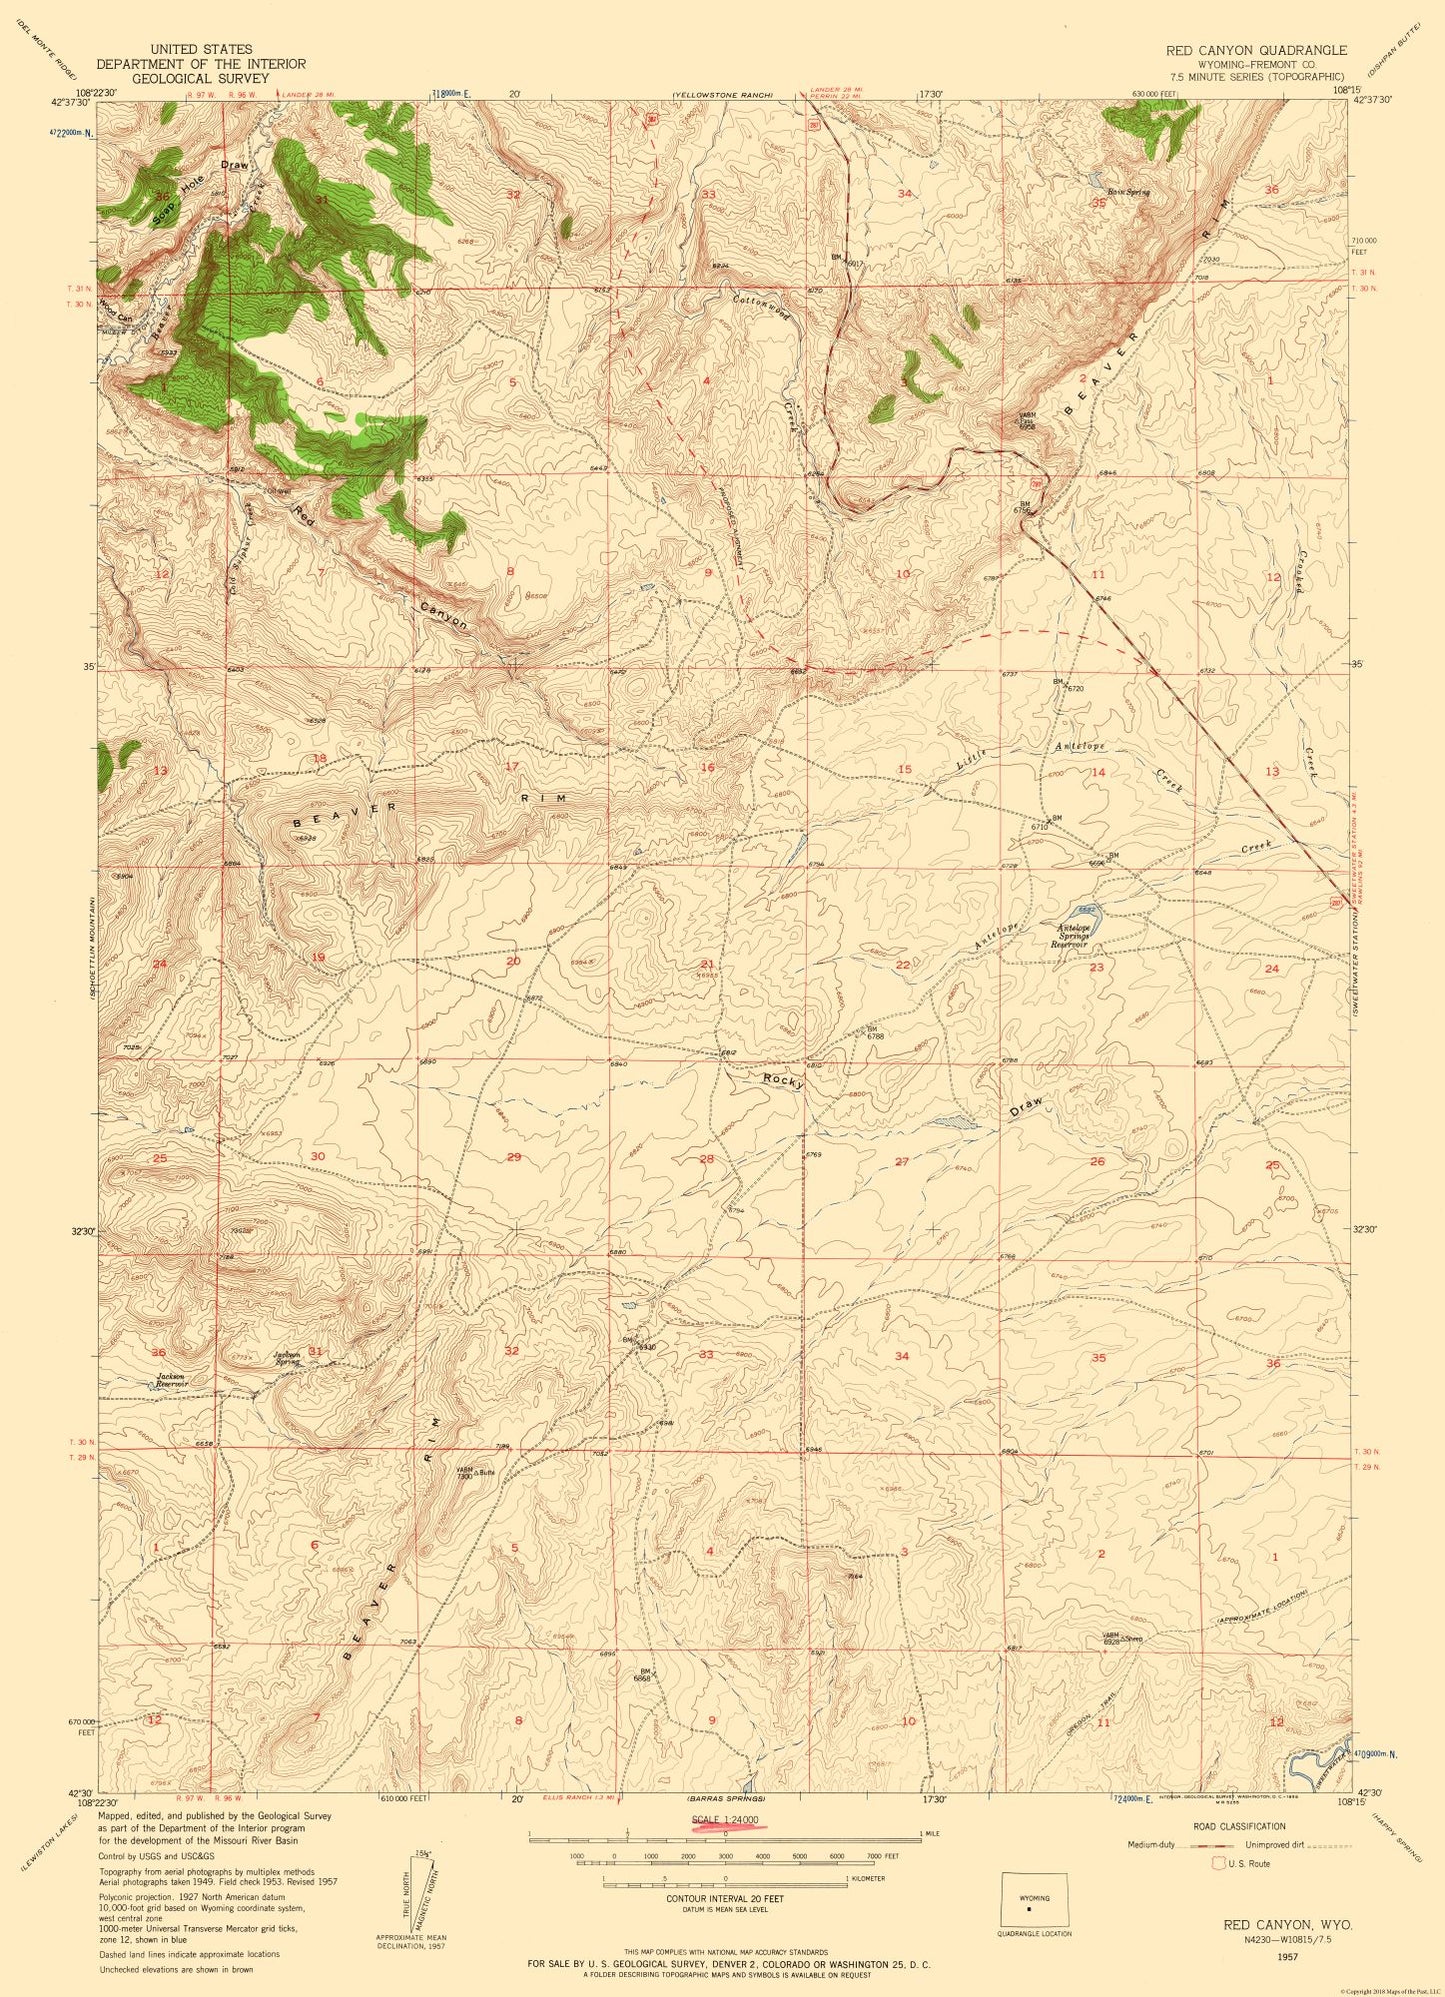 Topographical Map - Red Canyon Wyoming Quad - USGS 1957 - 23 x 31.79 - Vintage Wall Art